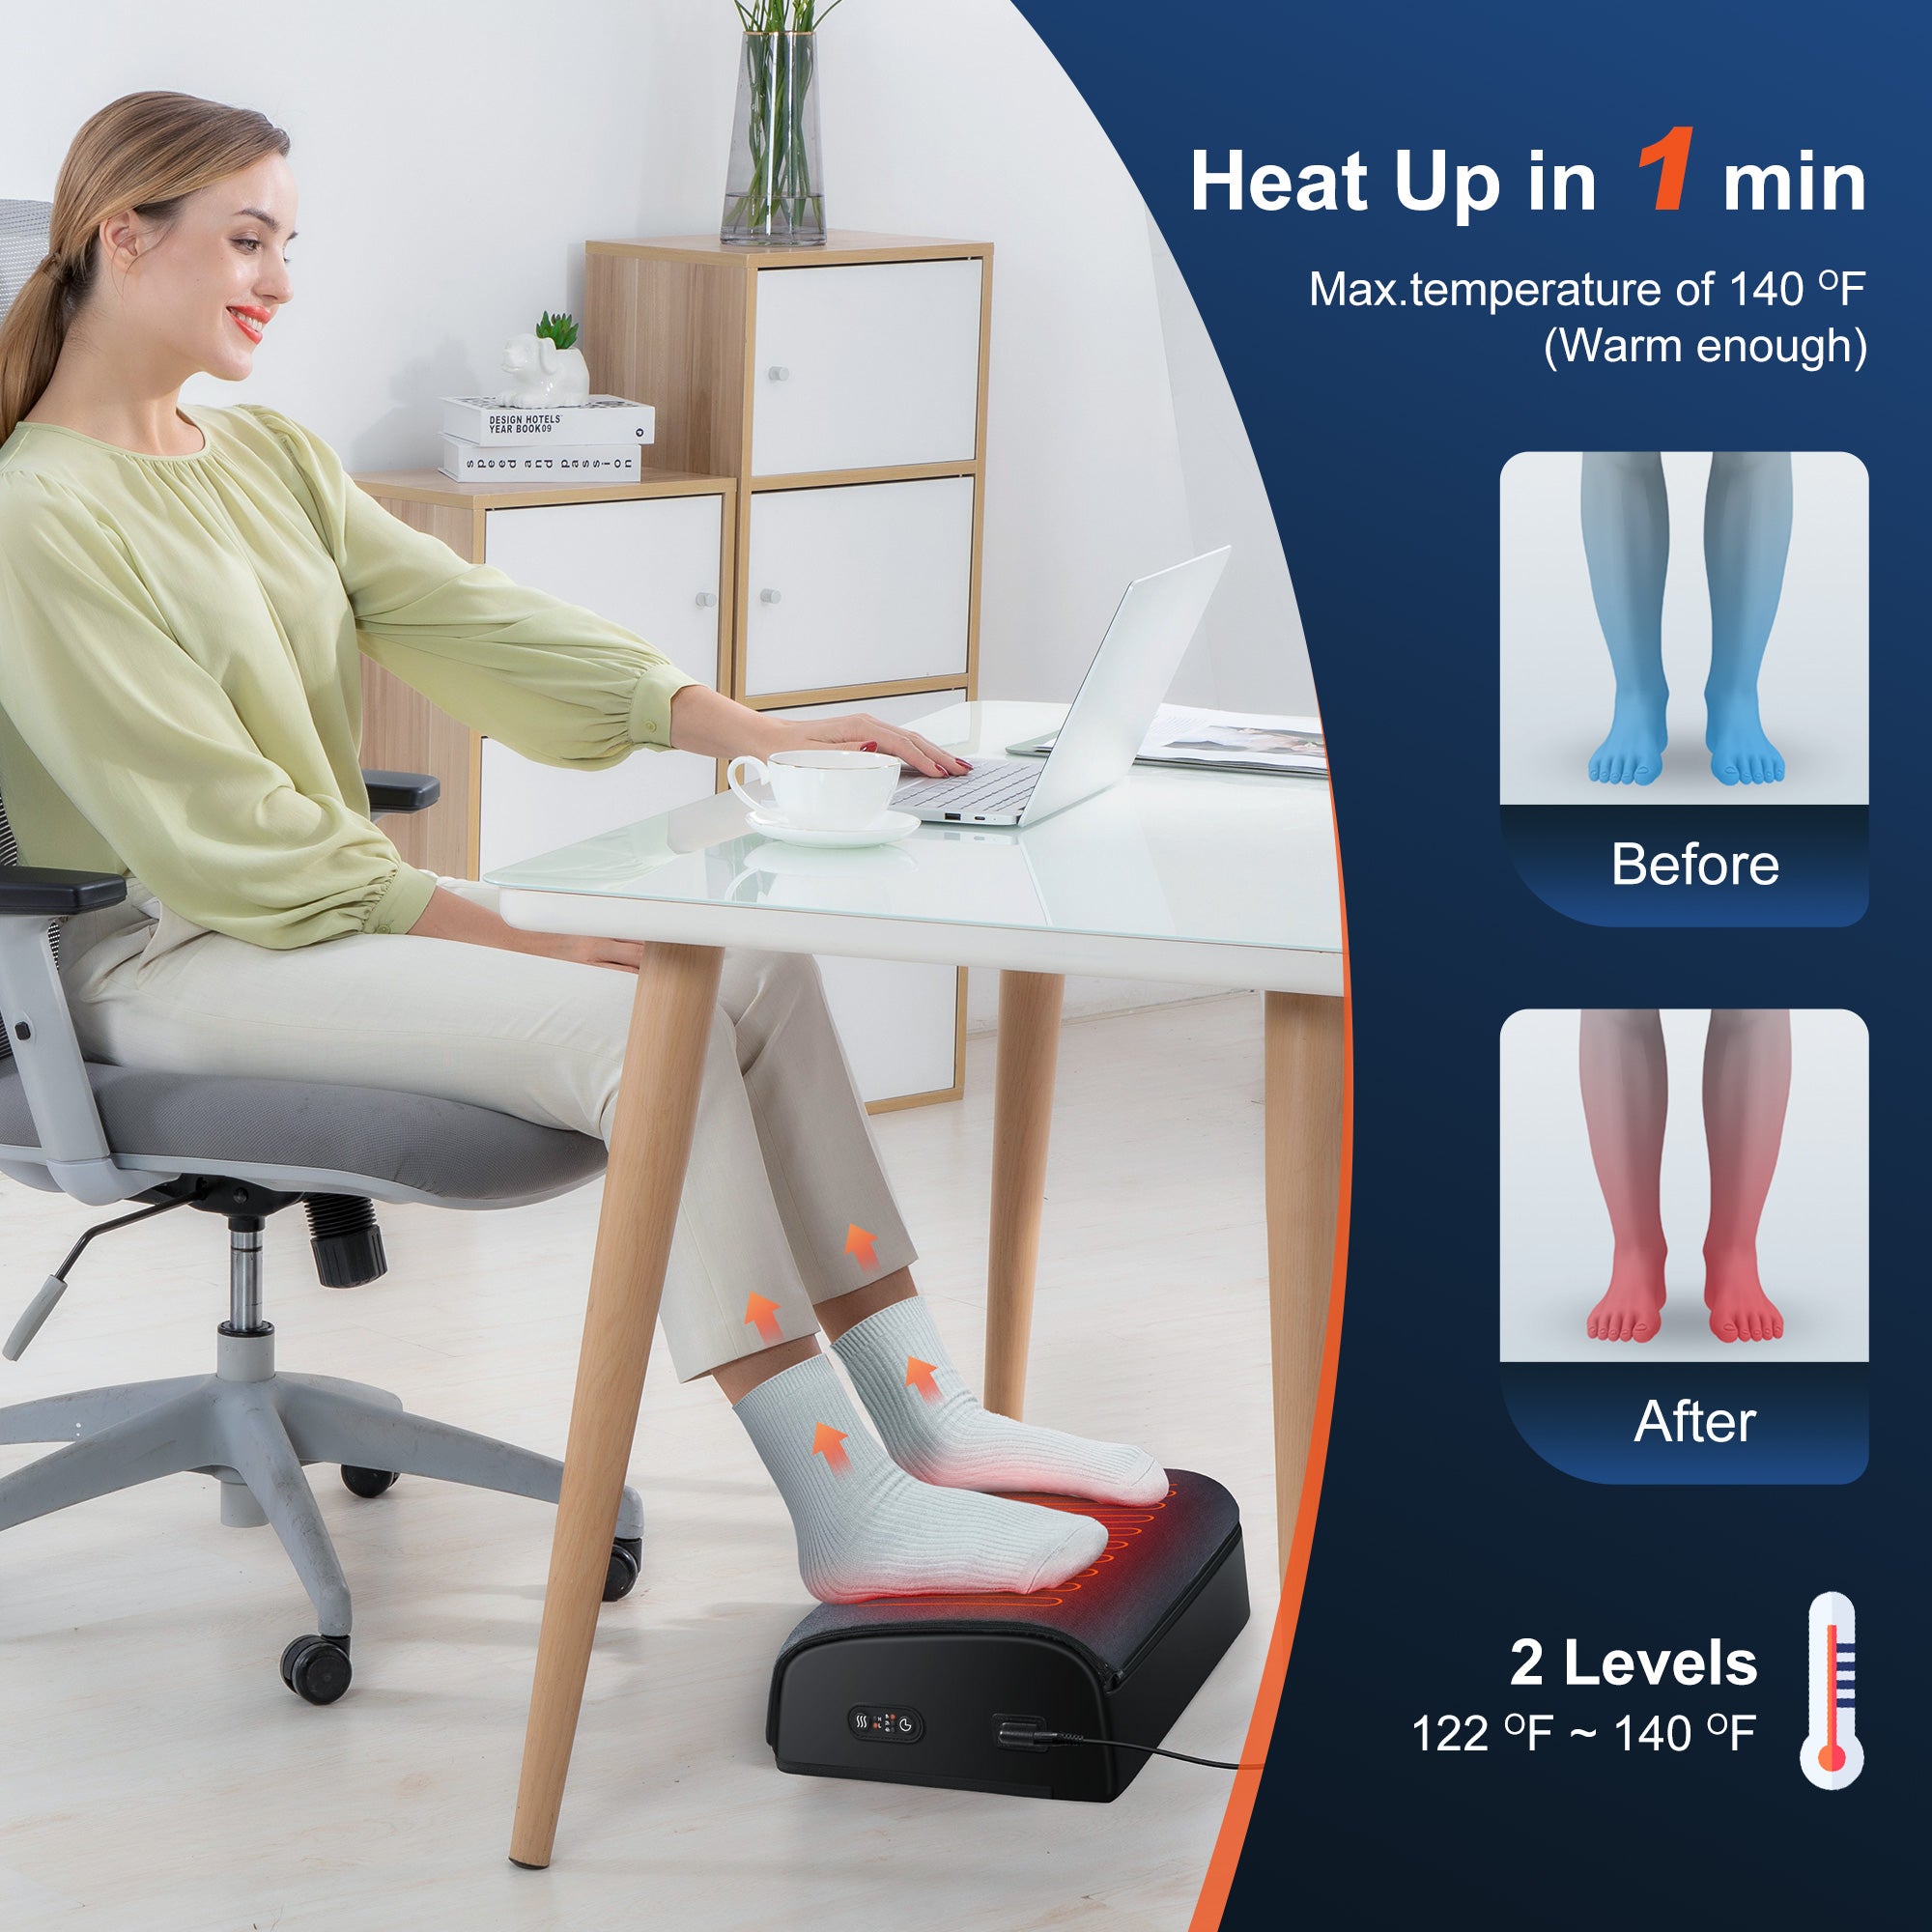 Comfier Heated Foot Rest for Under Desk at Work&Foot Warmer,Adjustable  Ergonomic Foot Stand,Office Chair&Home Gaming Desk Footstool,Memory Foam